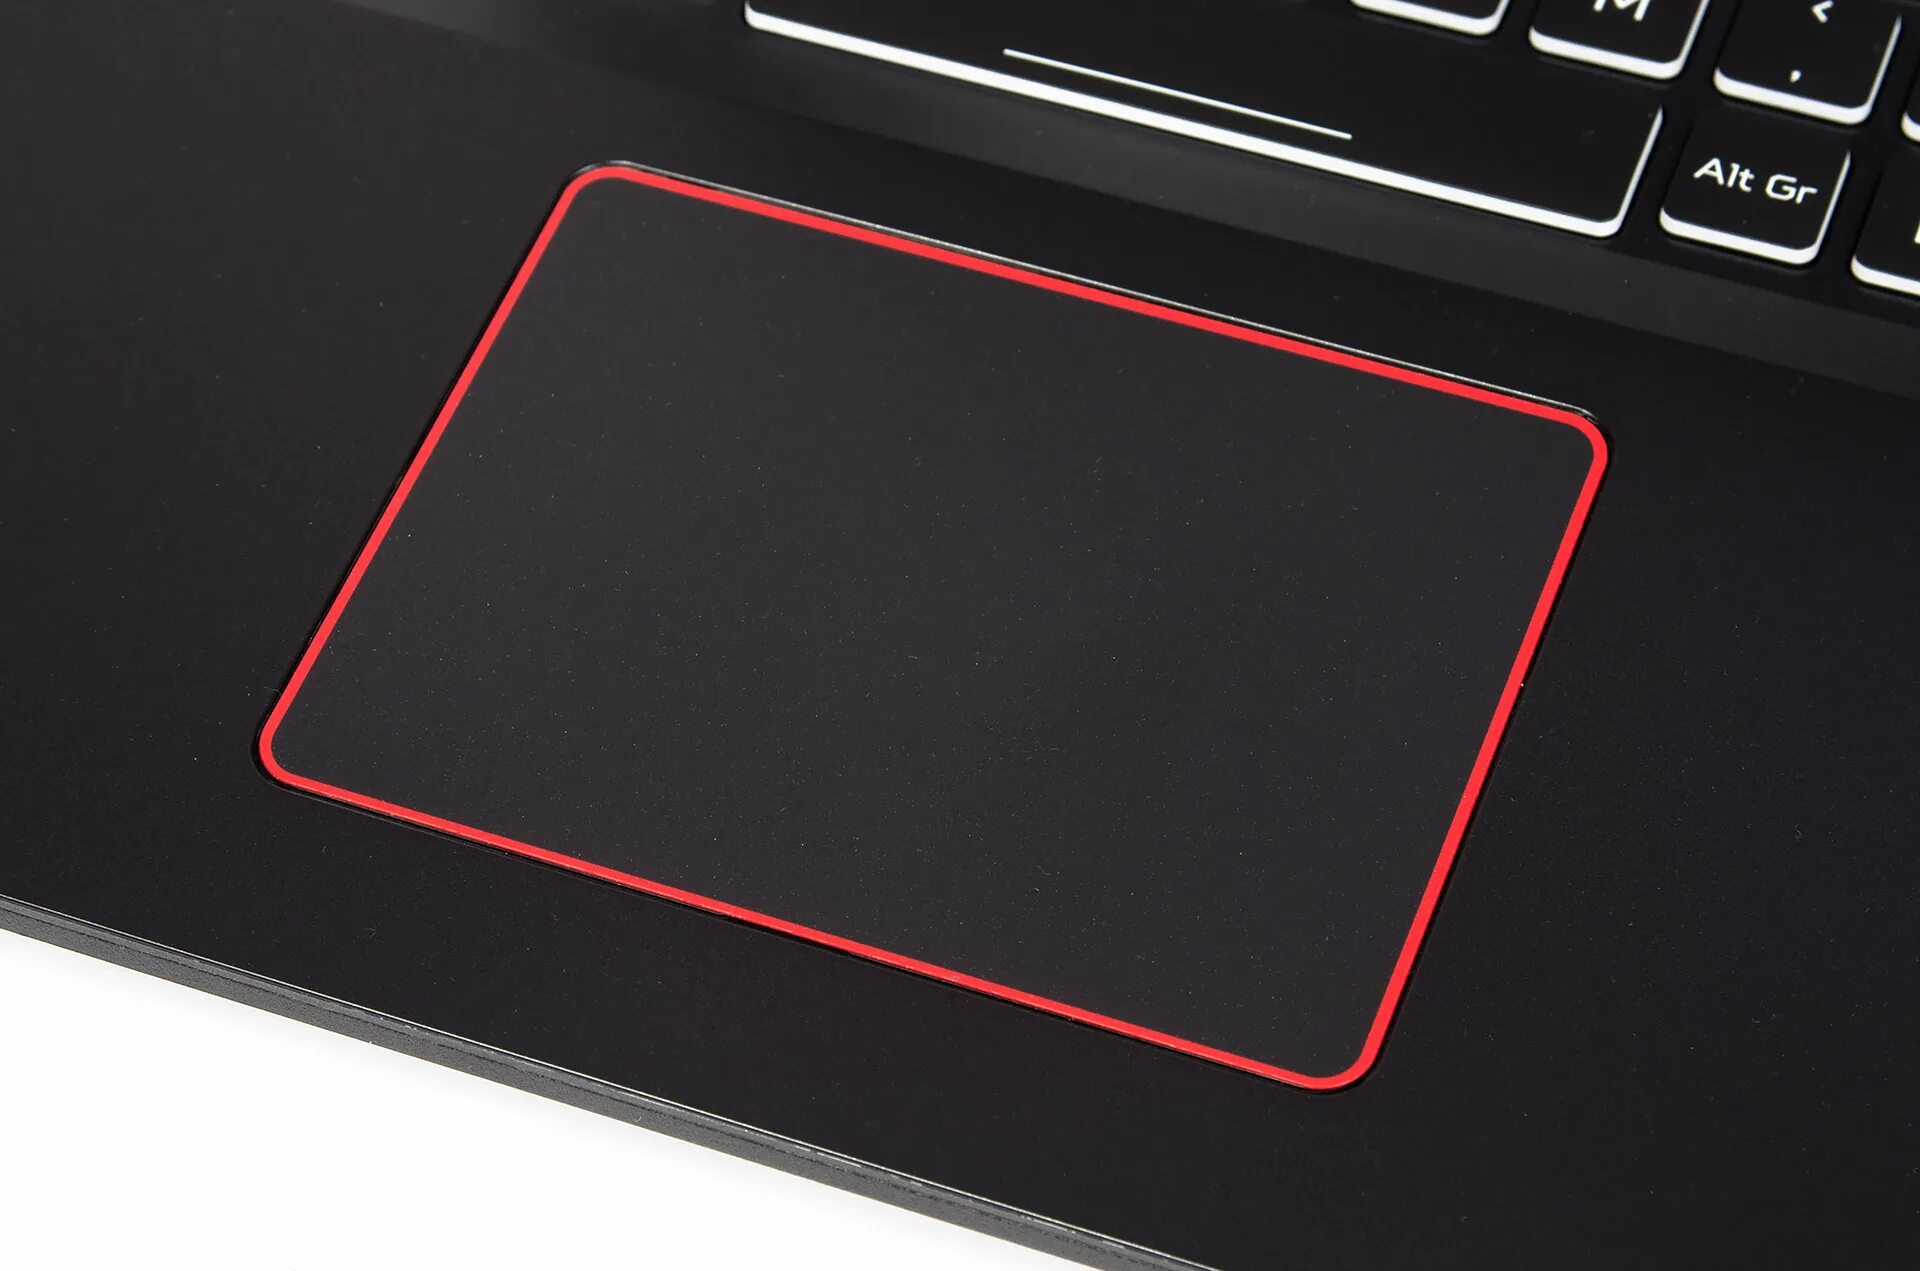 Acer Nitro 5 Touchpad. Acer Nitro 5 an517-52. COOLBOOST Acer Nitro 5. Тачпад экран.